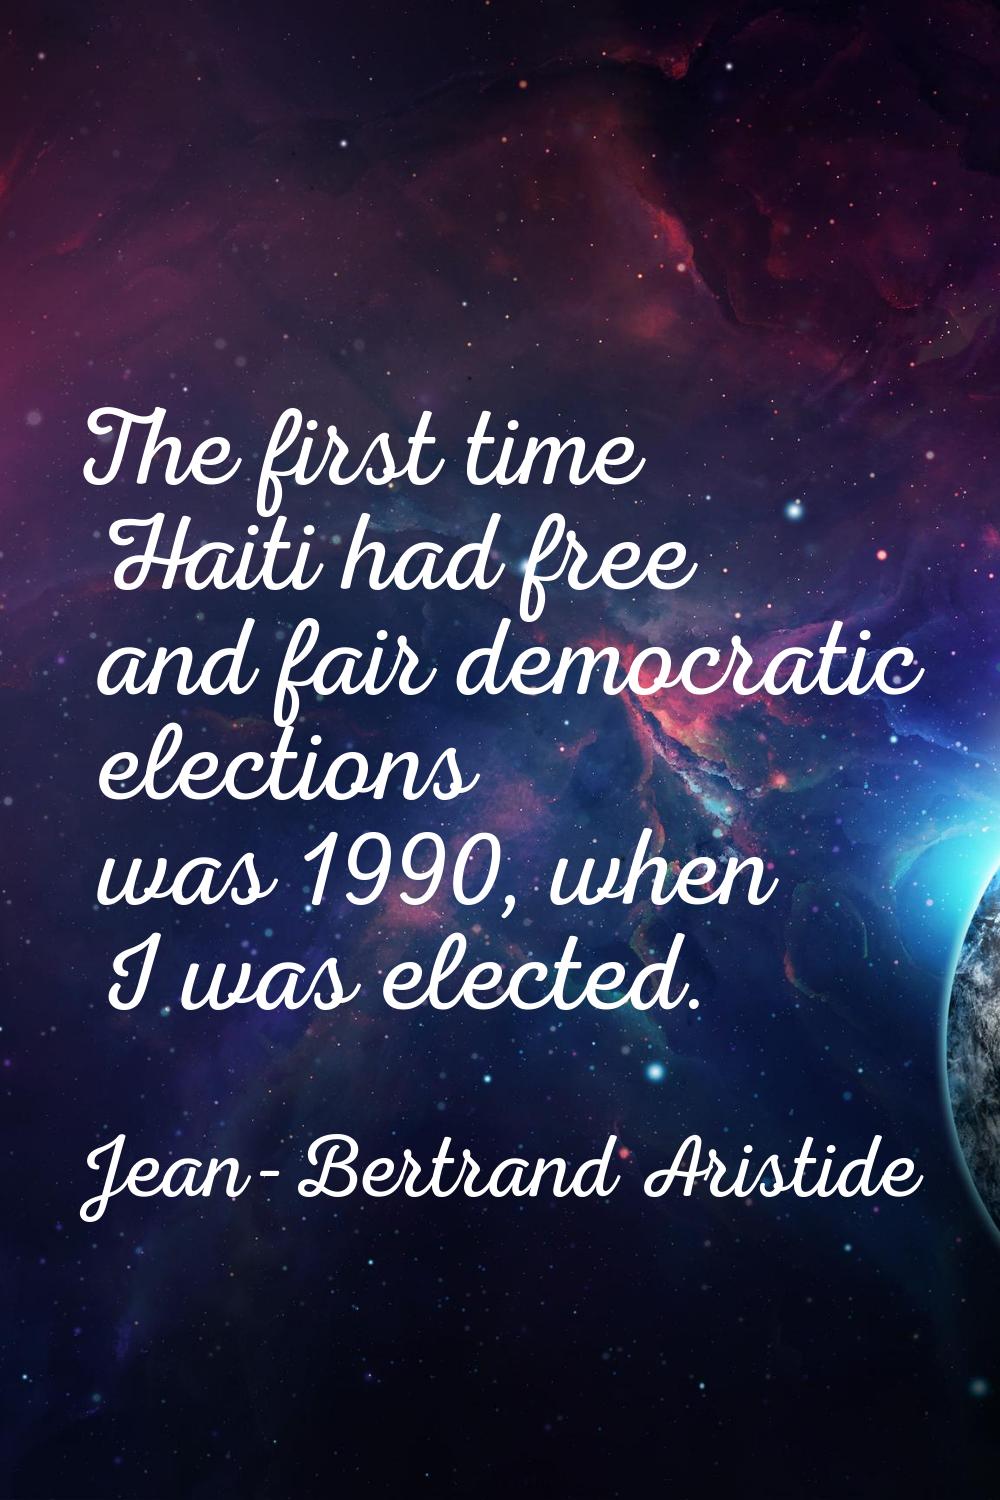 The first time Haiti had free and fair democratic elections was 1990, when I was elected.